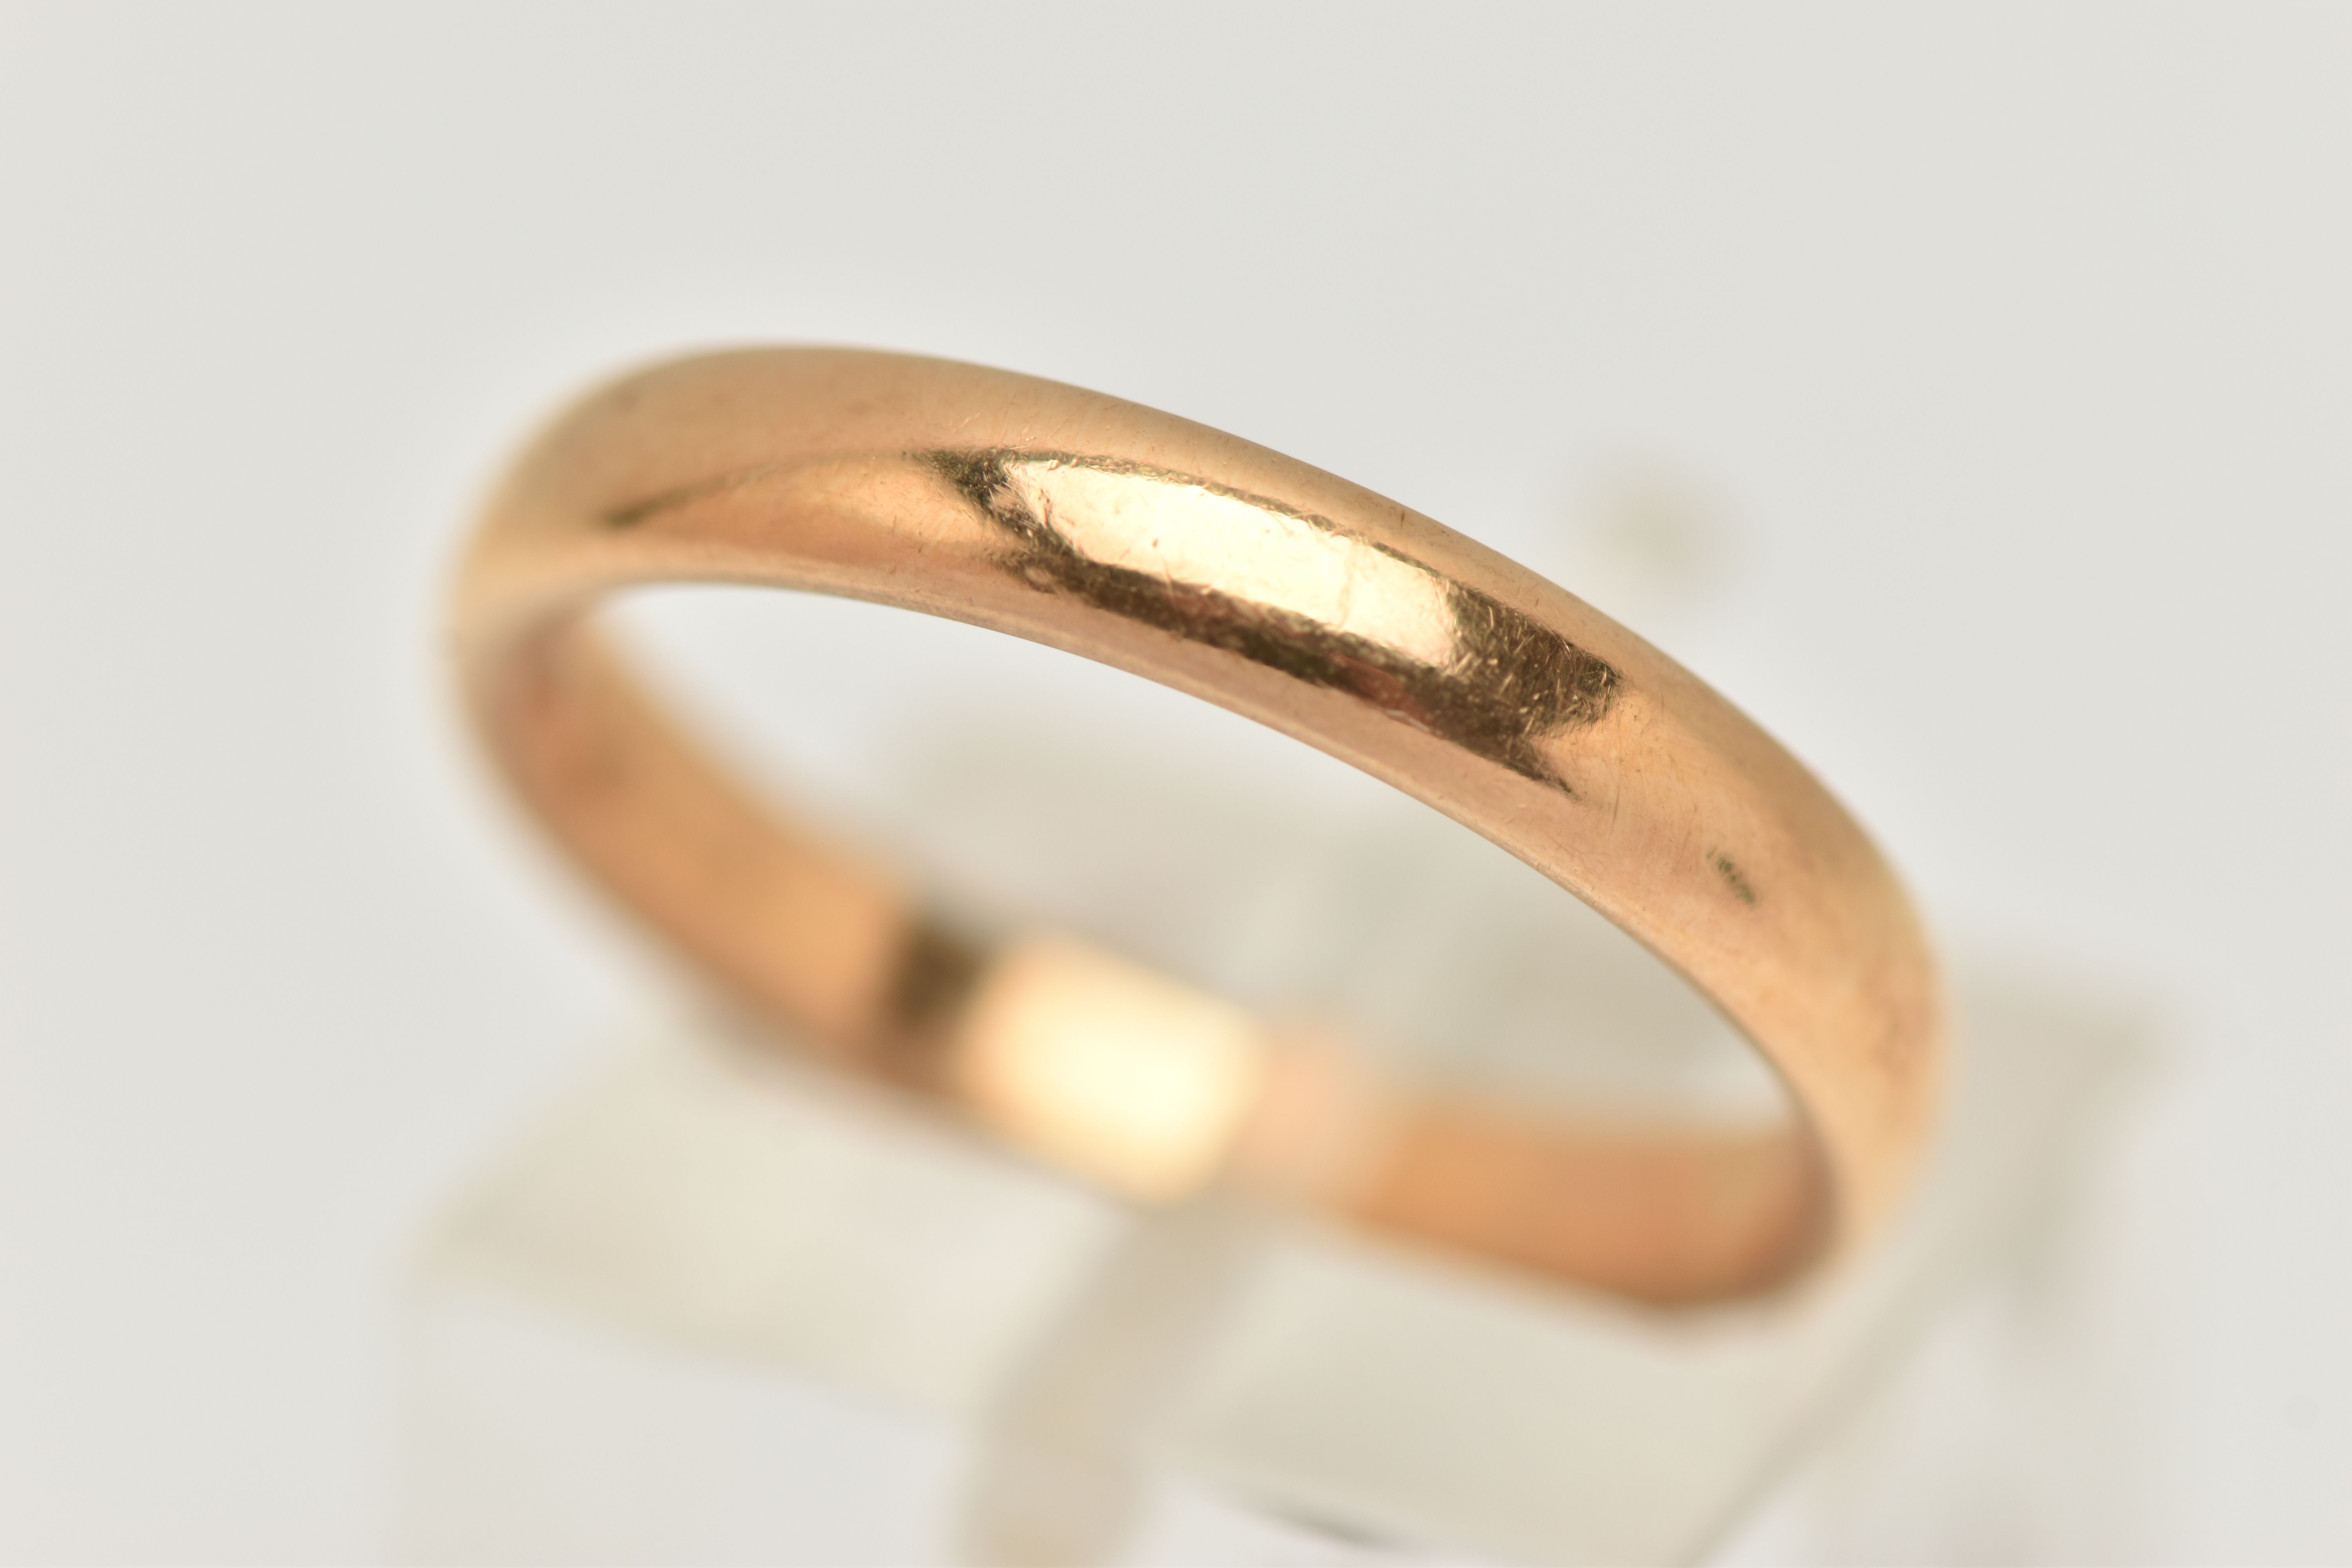 A YELLOW METAL BAND RING, polished band, unmarked, ring size N 1/2, approximate gross weight 4.8